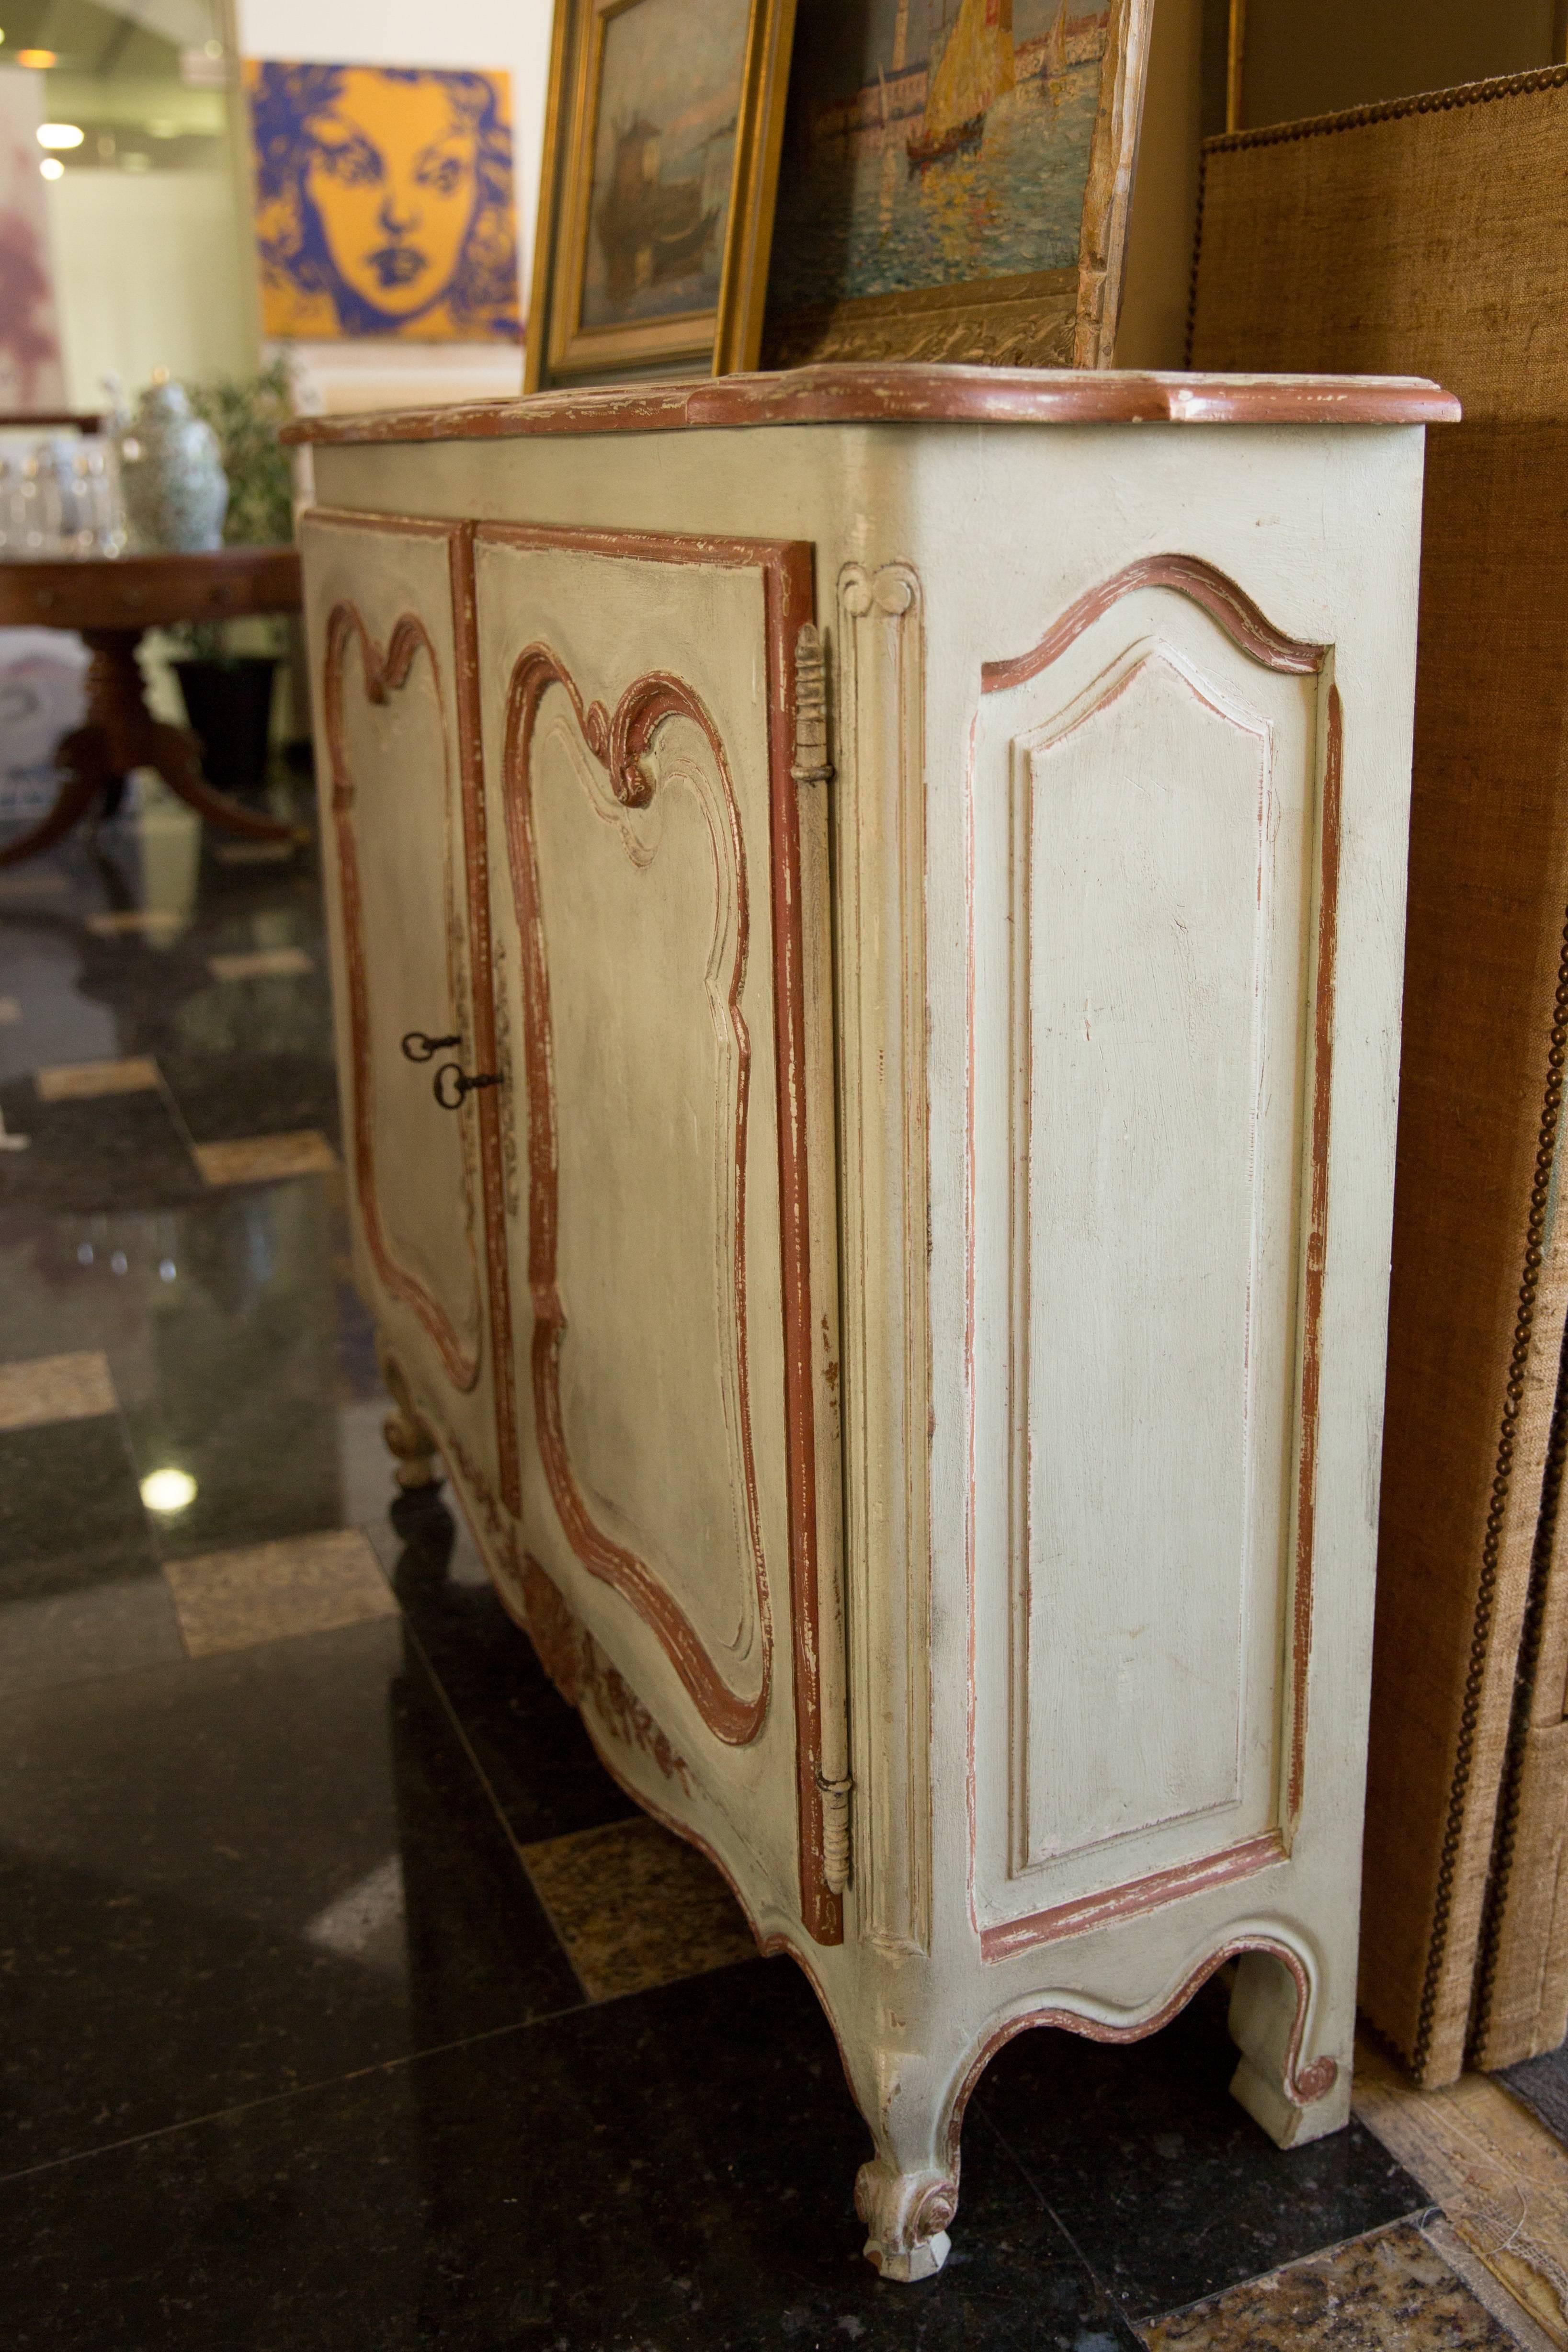 Beautiful Louis XV style hand-painted cabinet with two doors and charming design. Made of solid wood and perfectly painted in a soft light green with an antique distressed coral finish. This gives the look of a beautiful aged finish. Piece rests on